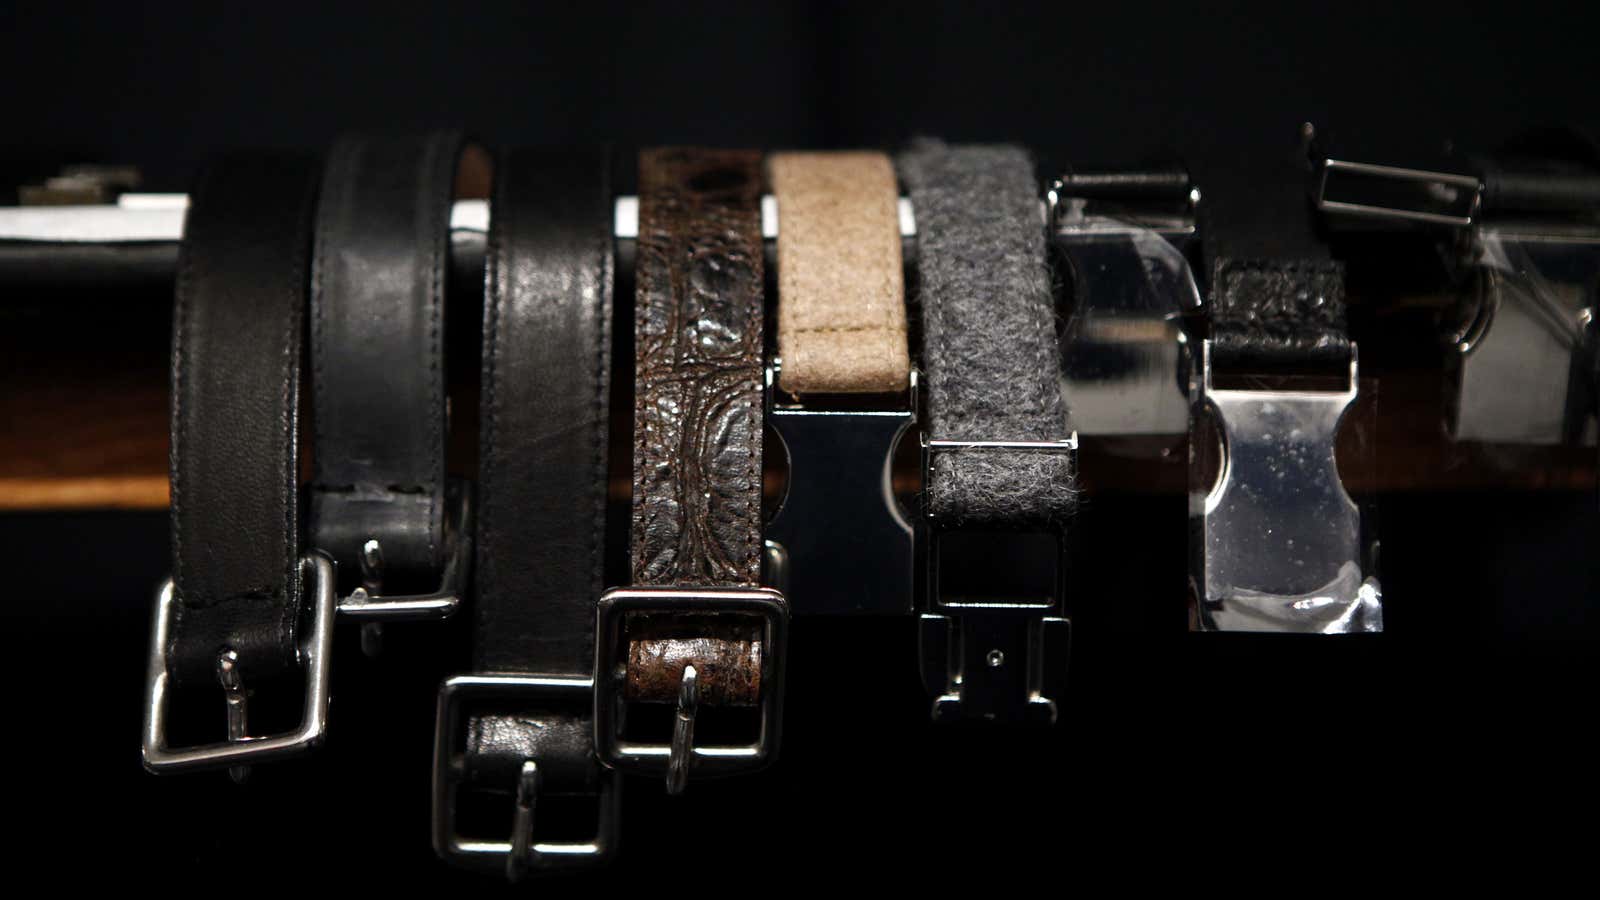 Belt sales are feeling the cinch during the pandemic.